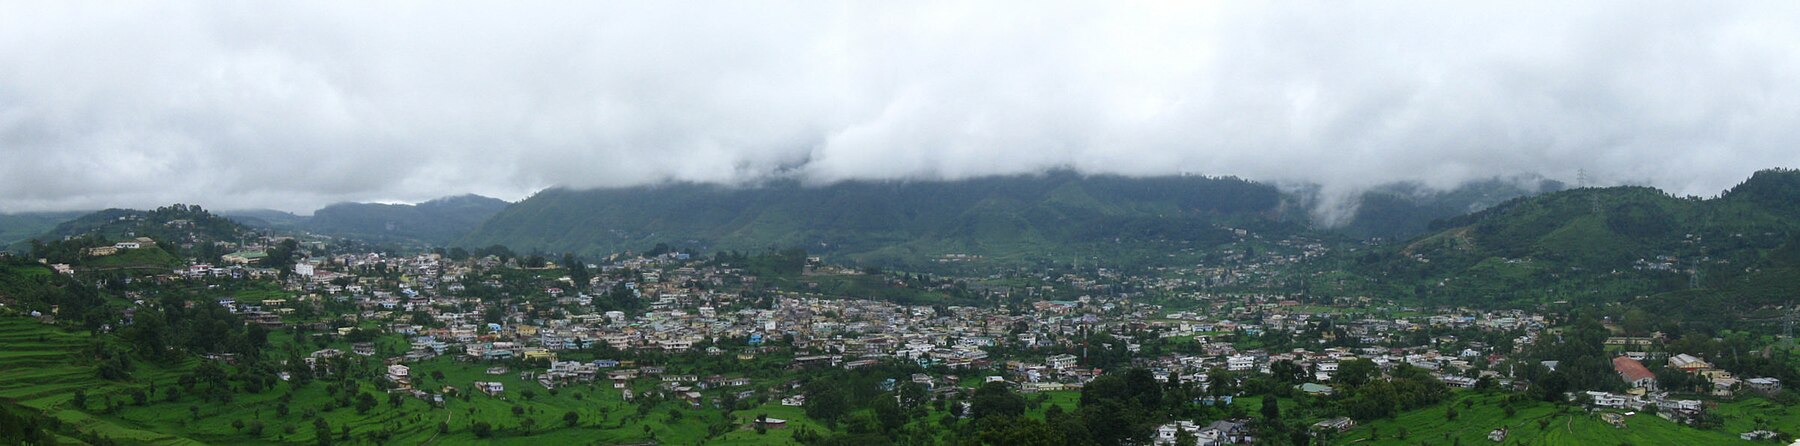 A panoramic view of Pithoragarh